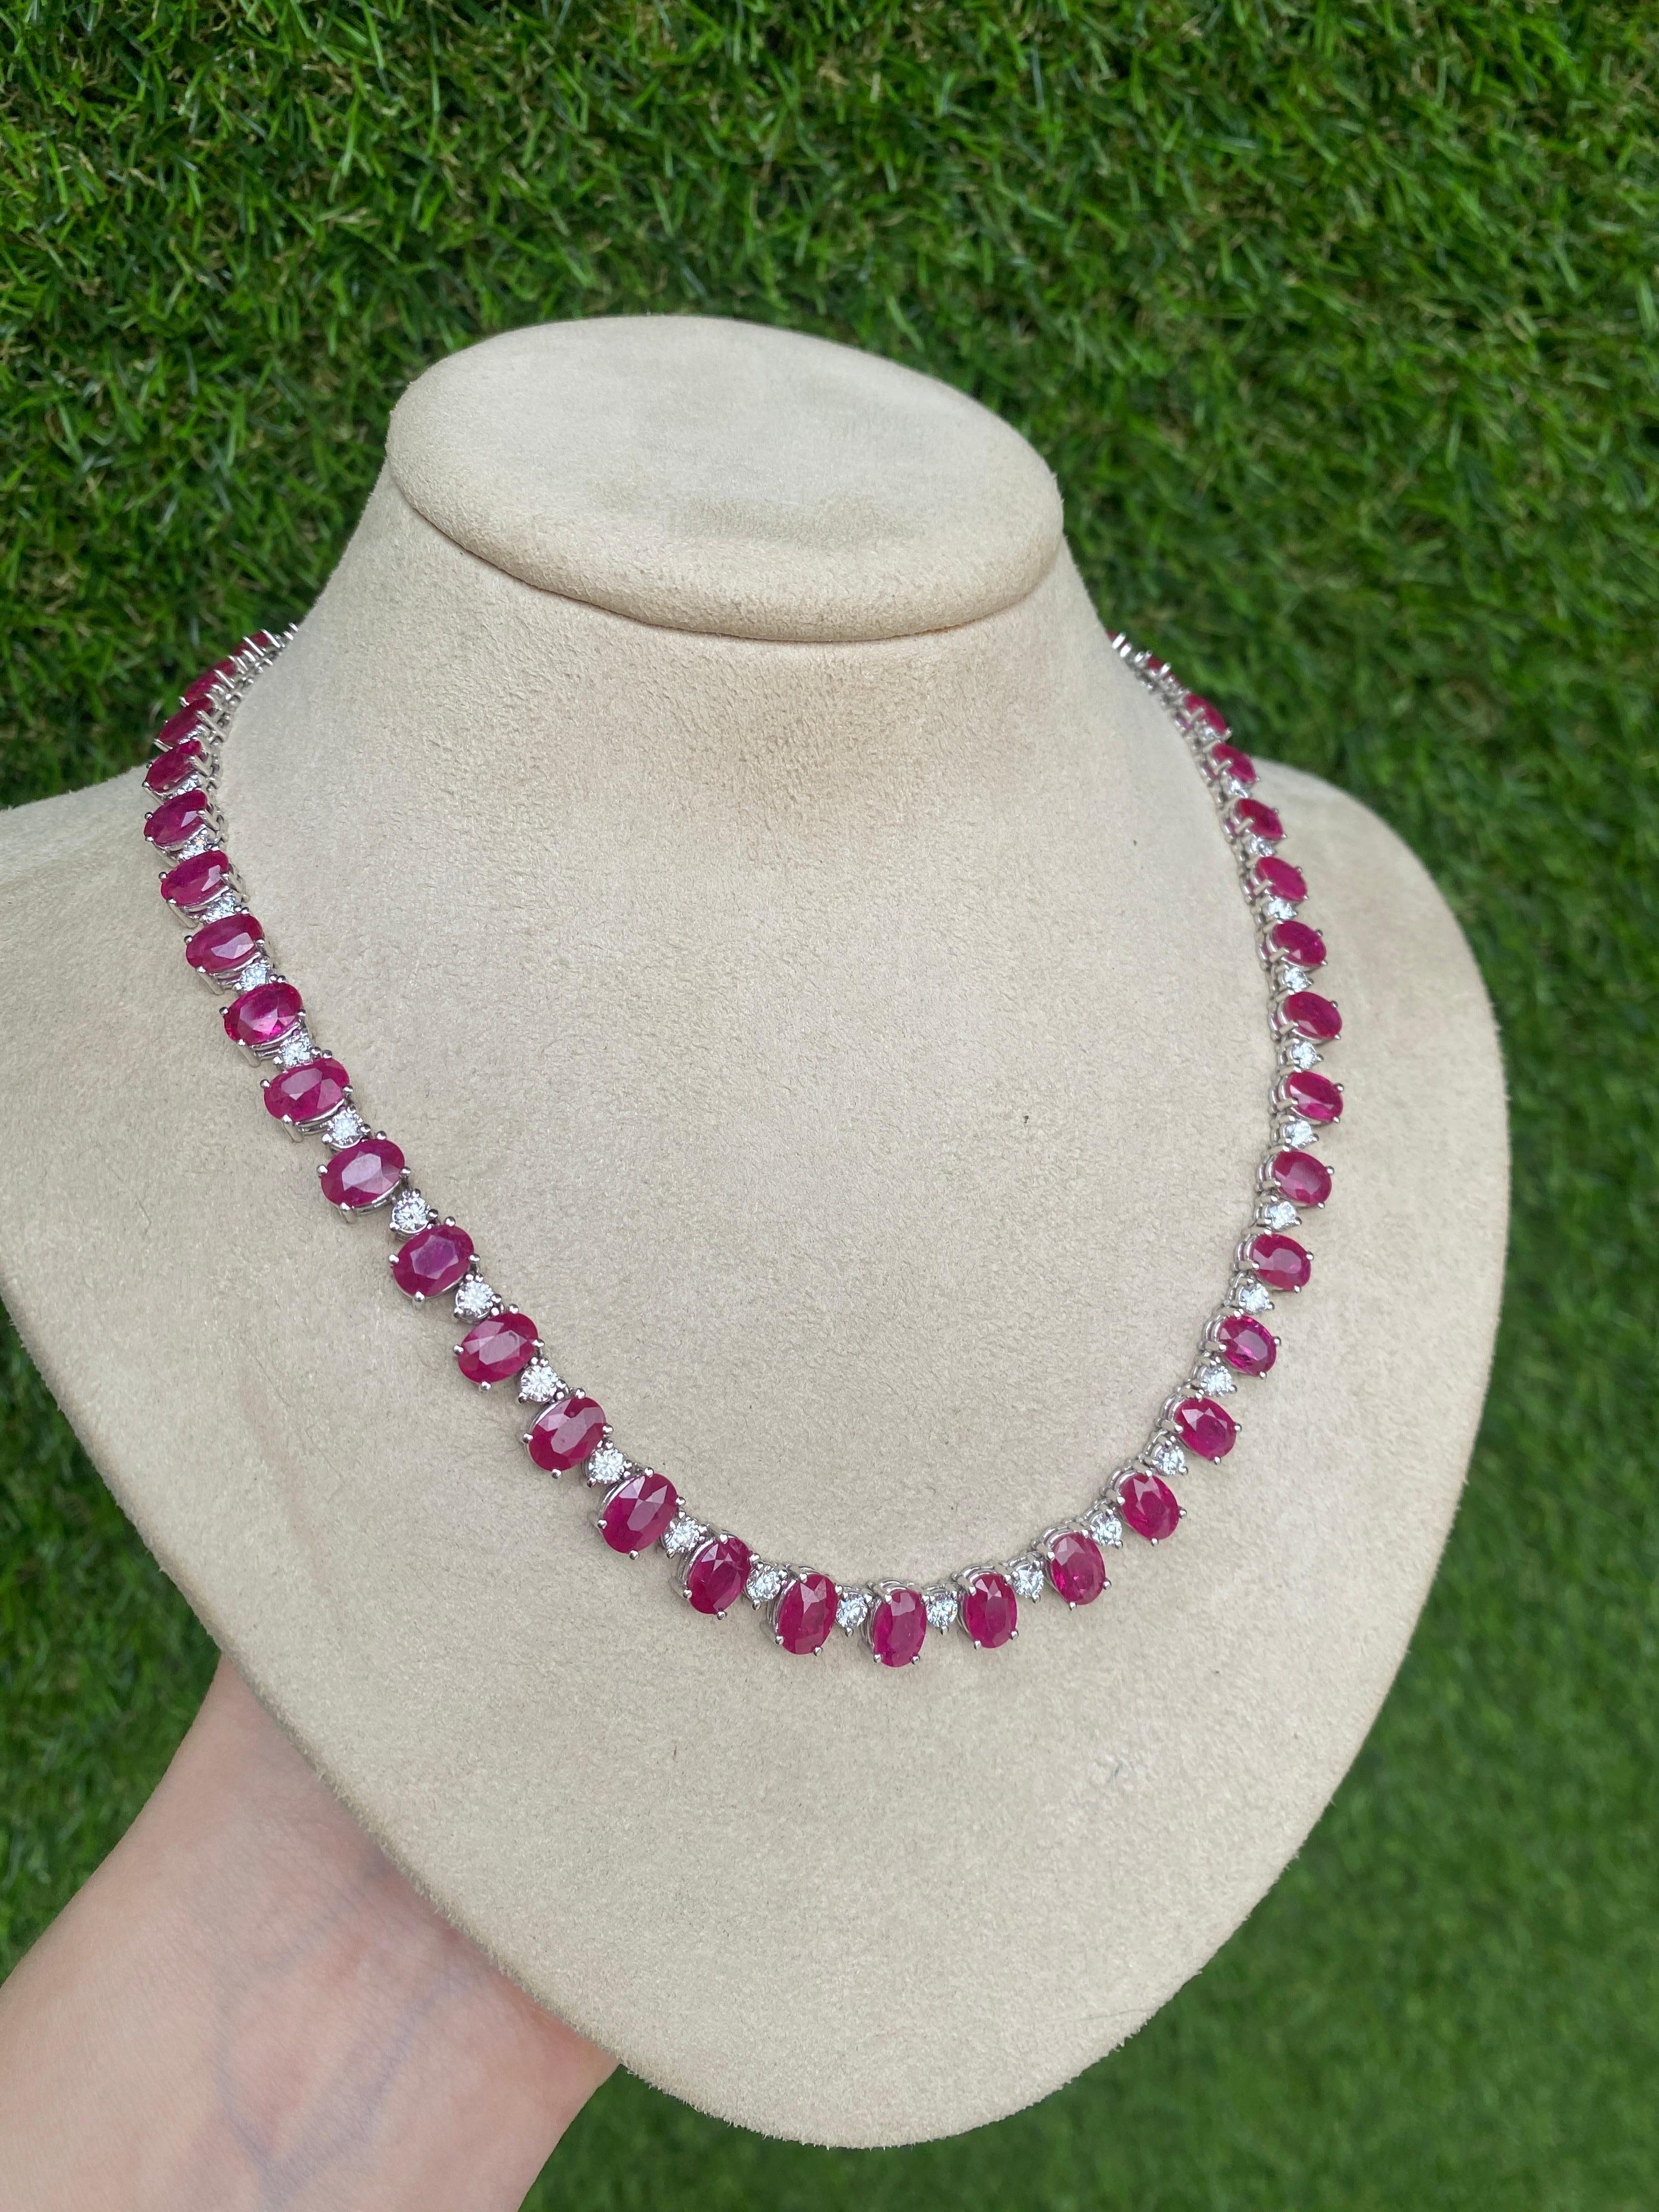 40.50ctw Natural Oval Cut Ruby & 5.20ctw Round Diamond Cocktail Necklace 3